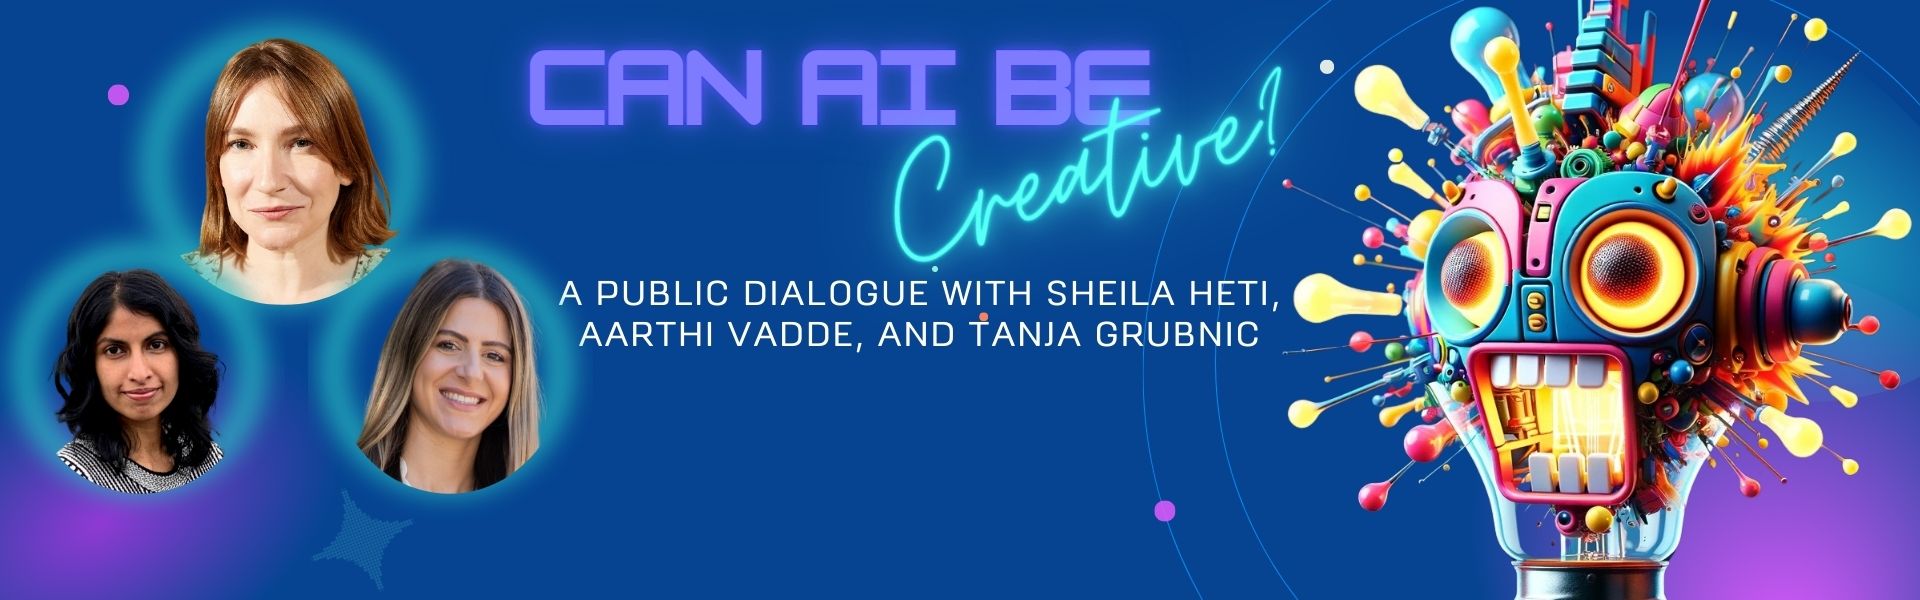 text: "Can A.I. be Creative? | A public dialogue with Sheila Heti, Aarthi Vadde, and Tanja Grubnic"